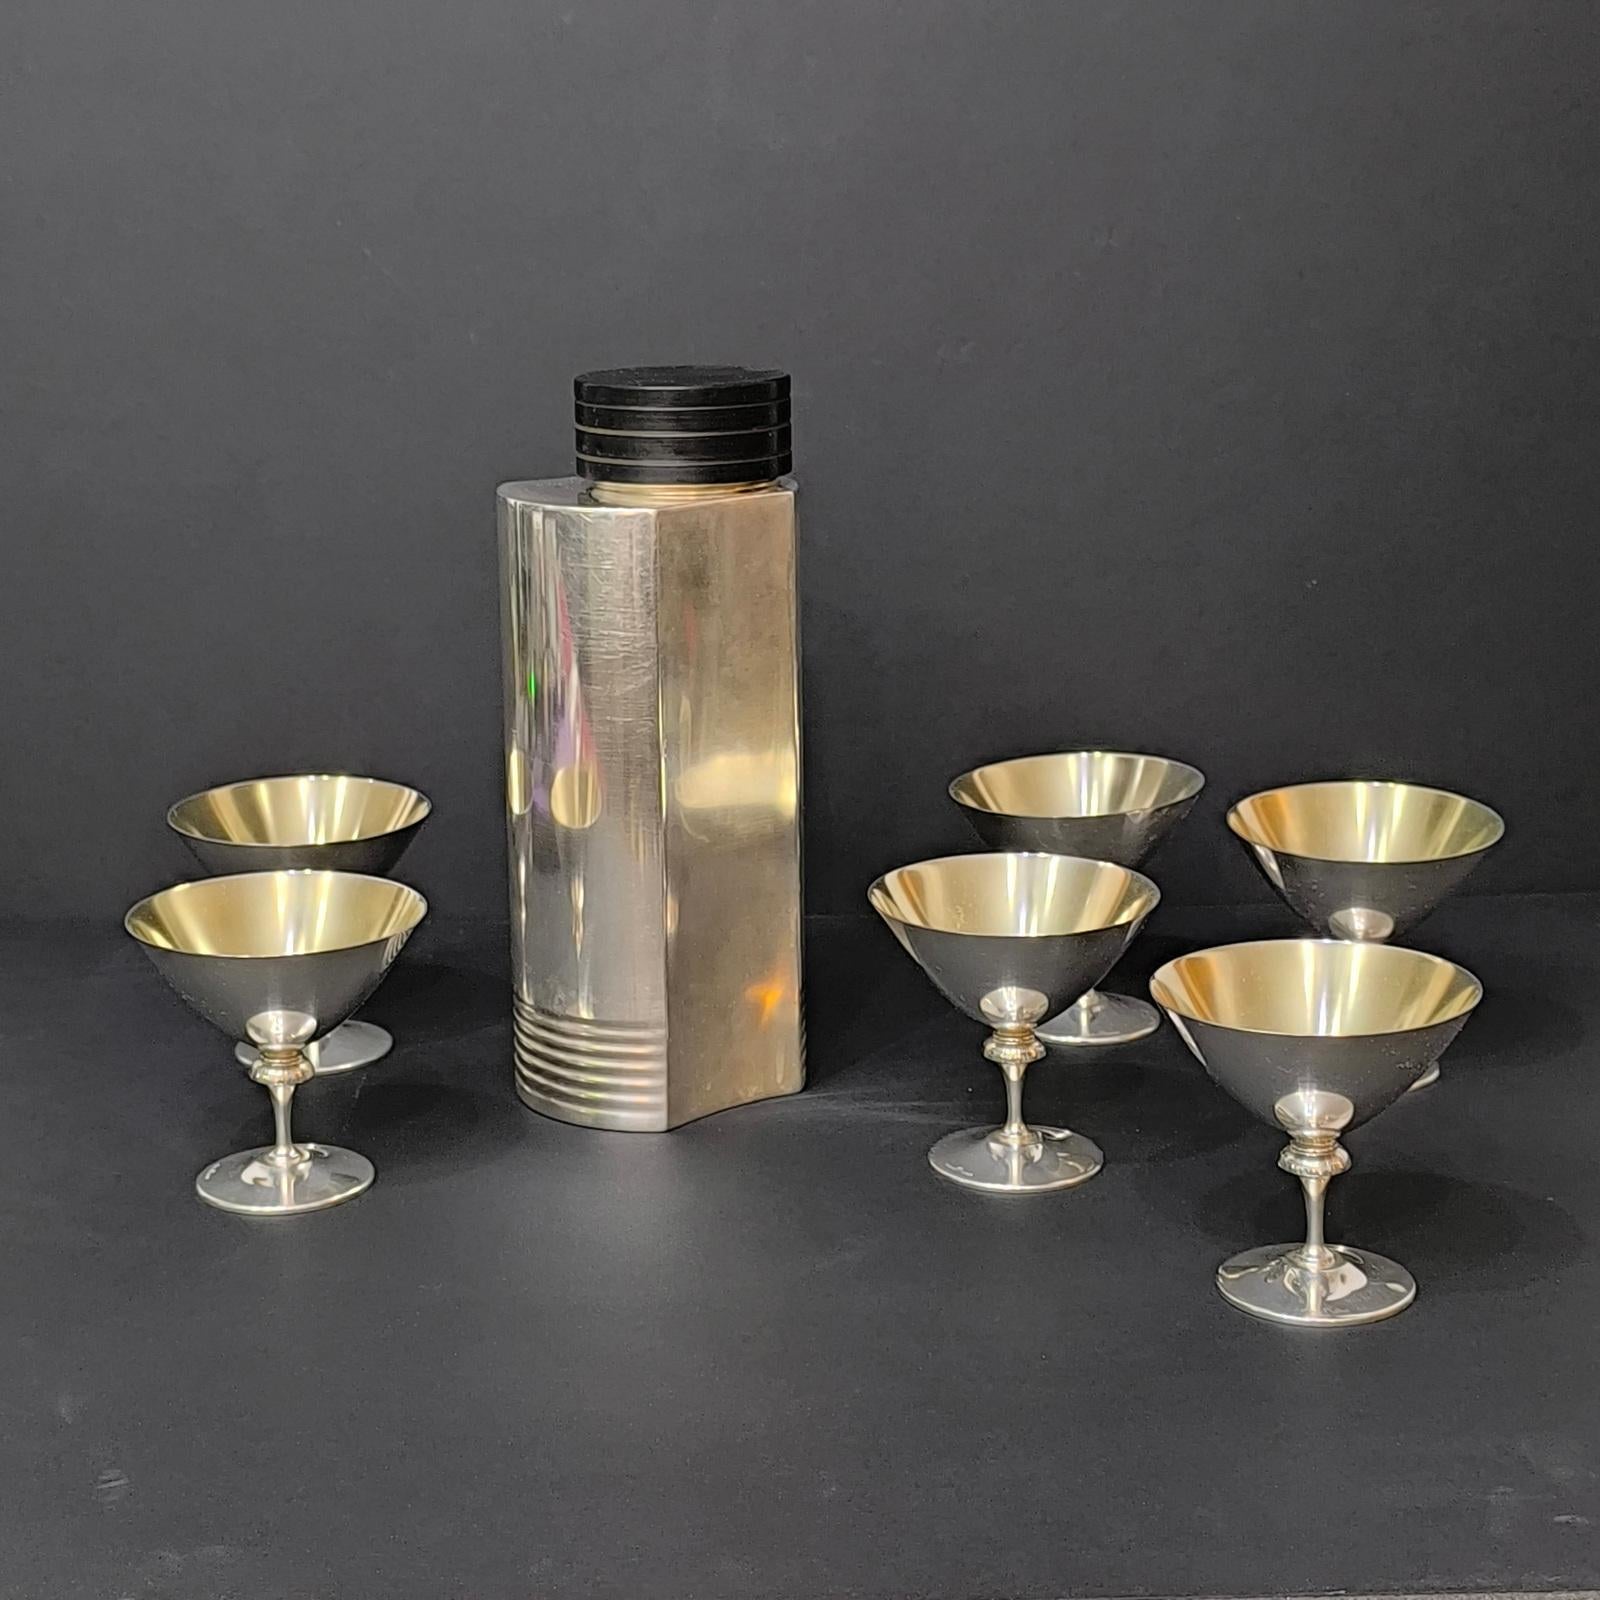 Fabulous, silver-plated Art Deco cocktail shaker and six martini glasses. Designed by Folke Arström in Sweden in 1936 and produced for GAB, each piece is stamped. The shaker still retains the original manufacturer label on the bottom. These items